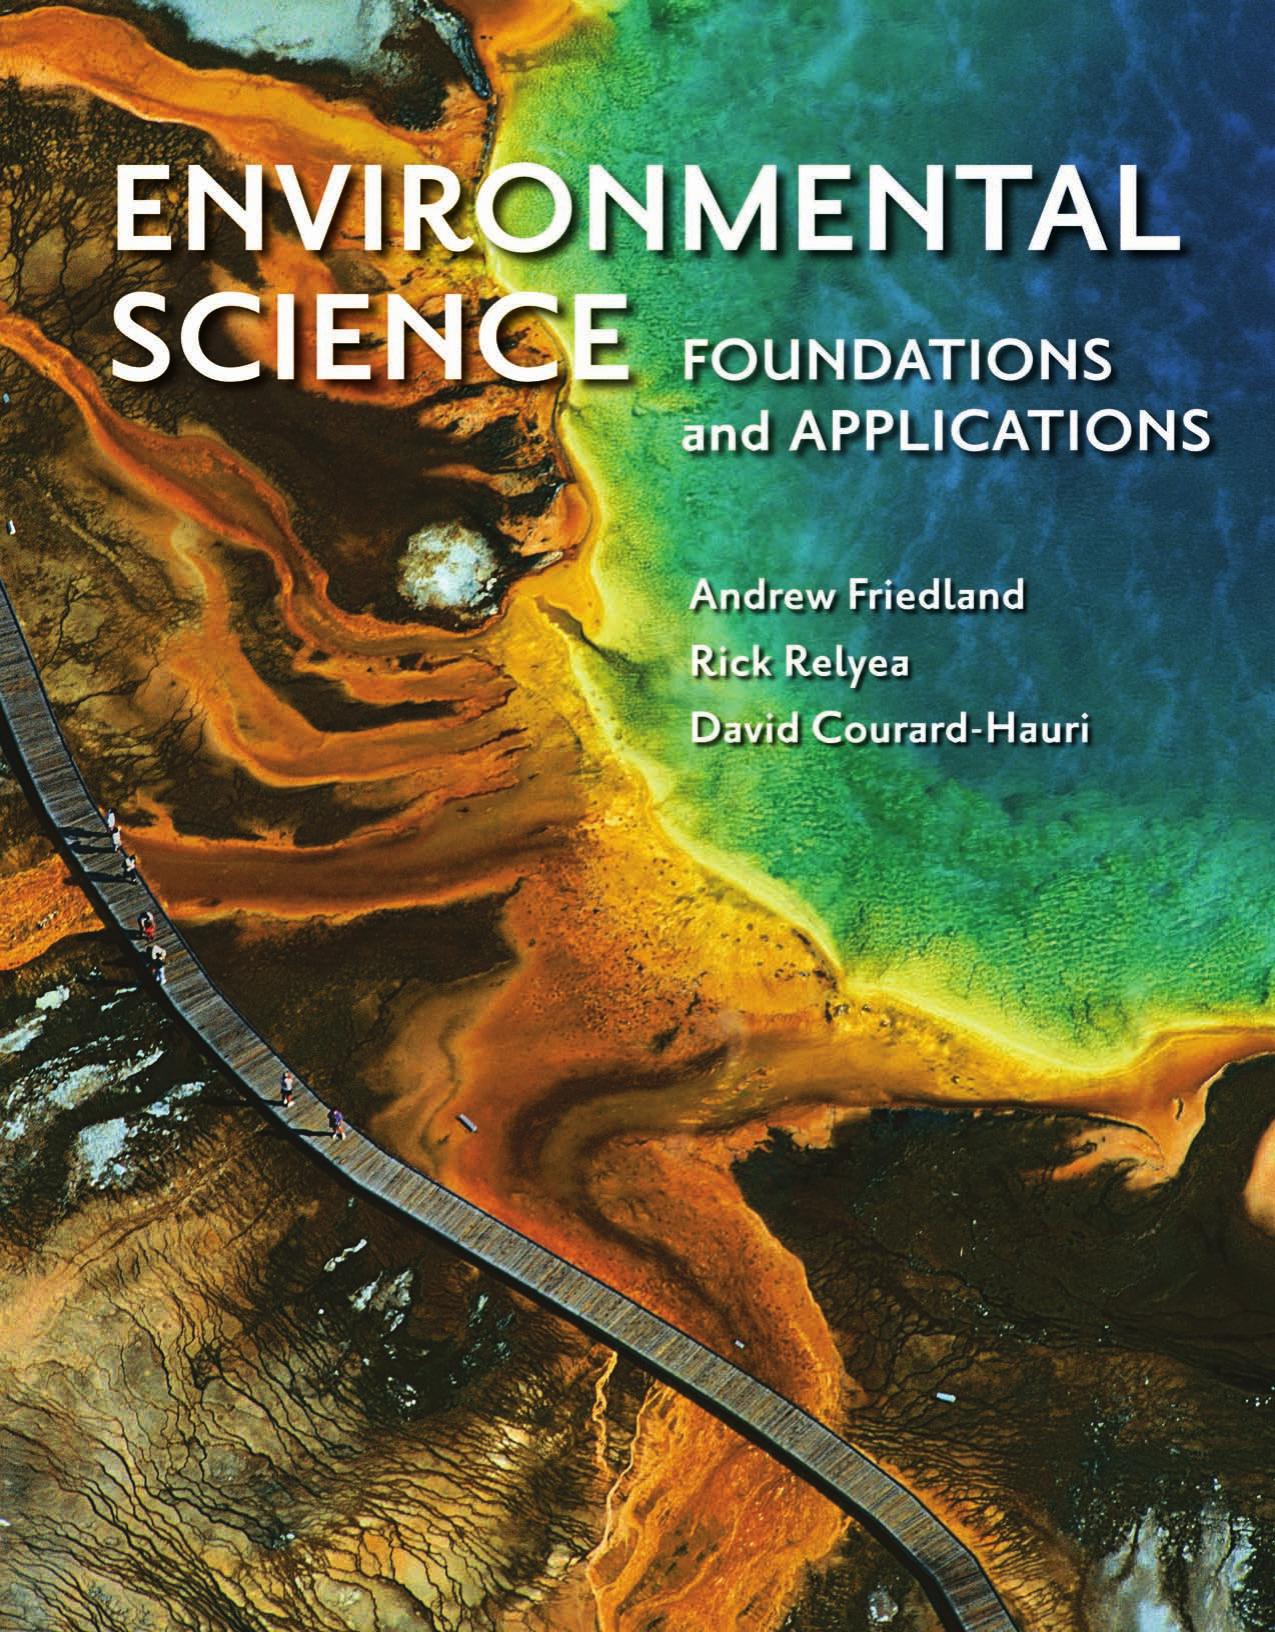 Environmental Science Foundations and Applications by Andrew Friedland.jpg